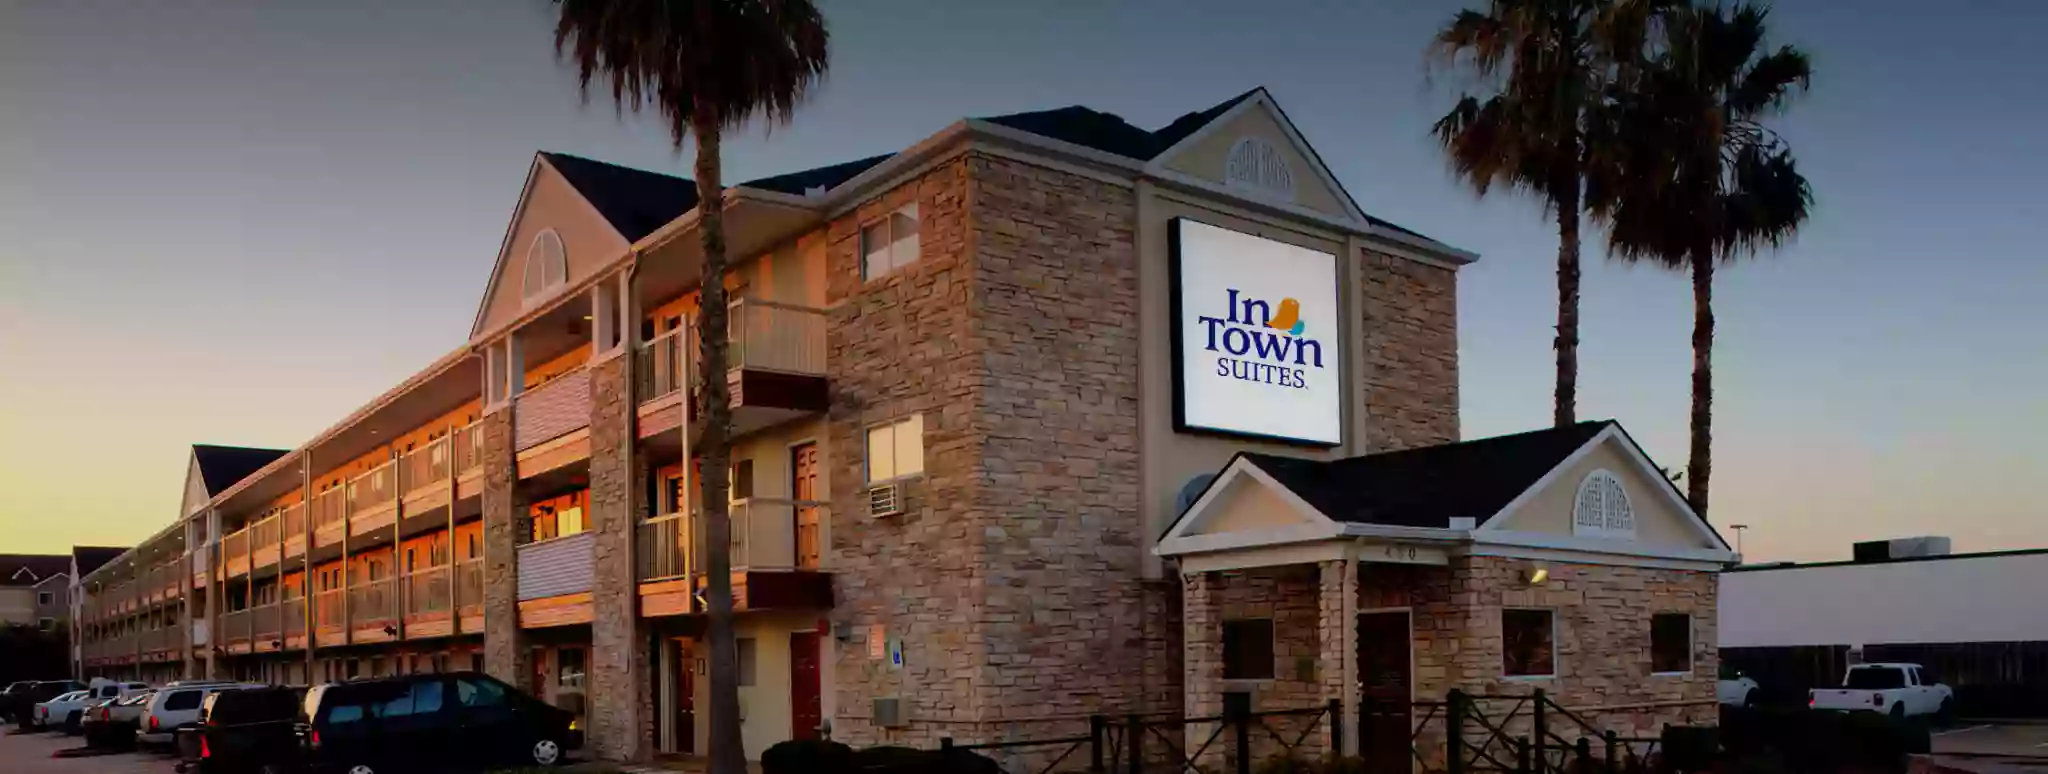 InTown Suites Extended Stay HoustonTX - Hwy 290/Cypress Fairbanks